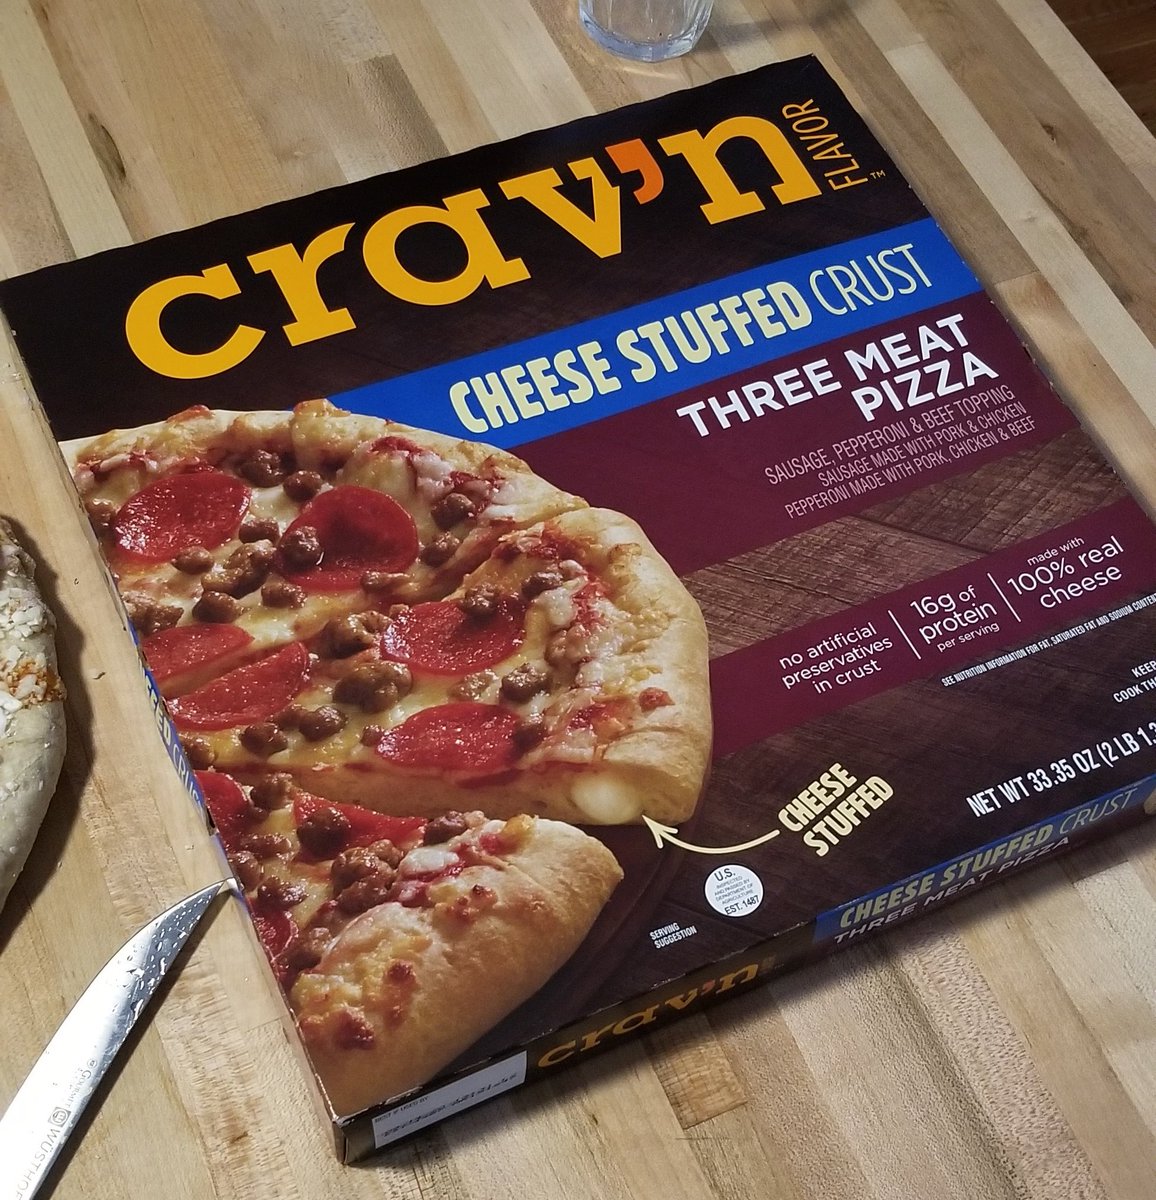 PIZZA 4: CRAV'N stuffed crust three meat. Pretty accurate day-old old-school Pizza Hut stuffed crust taste/mouth feel, but better sauce & more of it than most. Once again not much surface cheese. Meat wasnt sawdusty. Hate the brand name but was pretty into the pizza. Solid B+/A-